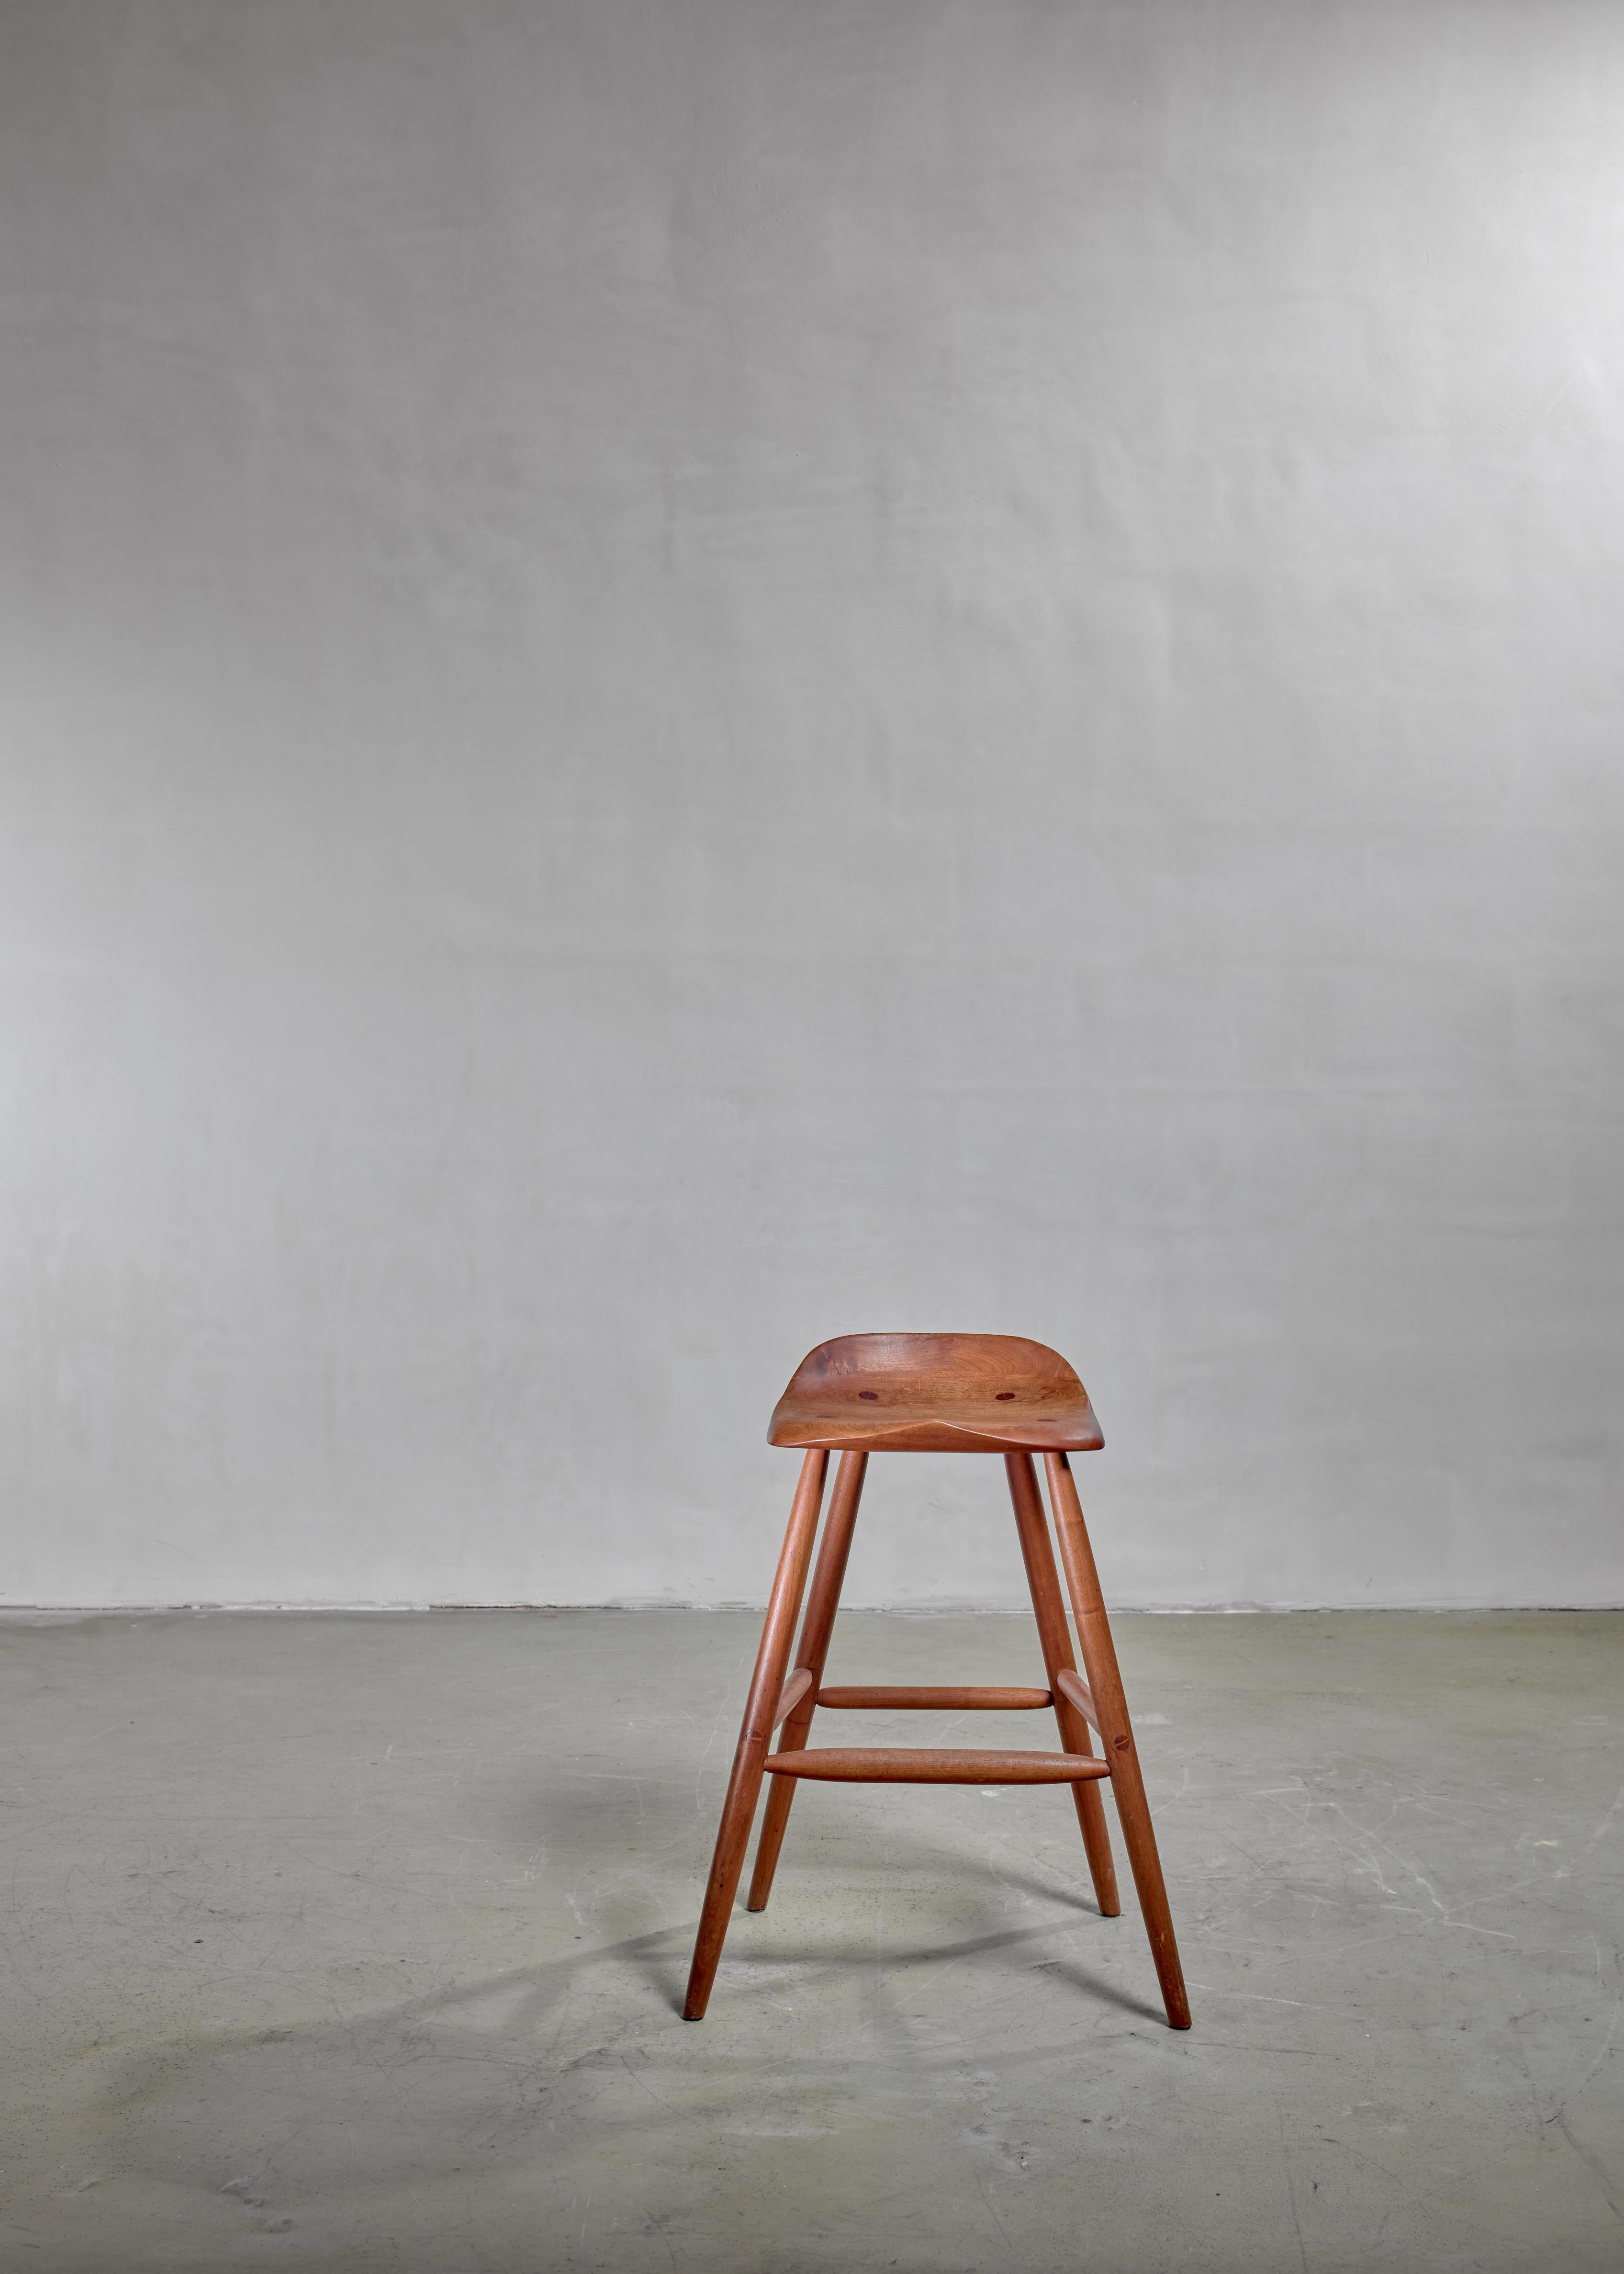 A wonderful bar or studio stool in walnut by Hugh Davies. The stool has a wonderfully sculpted and curved seating, for more comfort. The visible connections in the seating are a beautiful detail.
In a perfect condition and branded by Davies